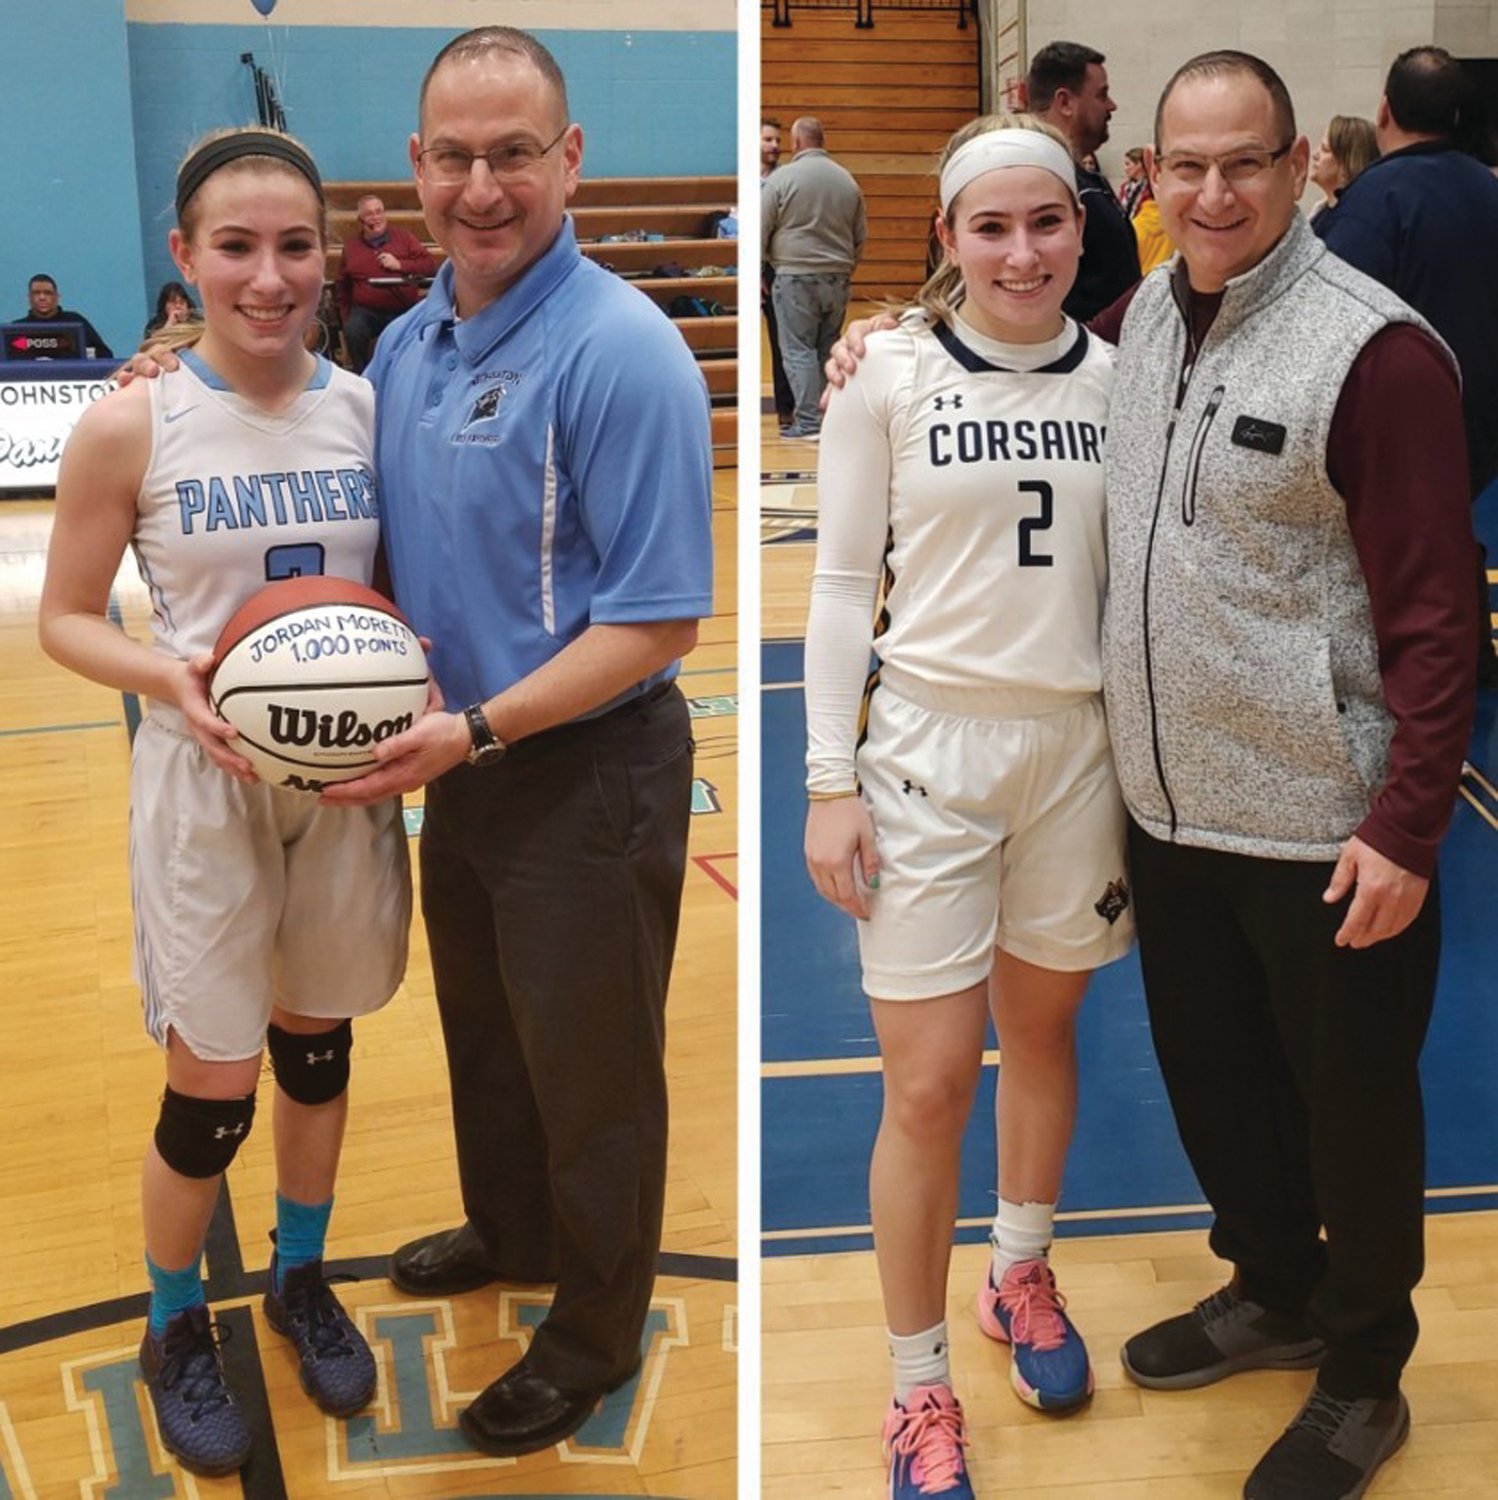 THEN AND NOW: Johnston native and UMass-Dartmouth guard Jordan Moretti recently scored her 1,000th college point in the team’s season opener. She also scored 1,000 points while playing for Johnston High School. Joining her at left is her former coach Chris Corsinetti. (Submitted photo)